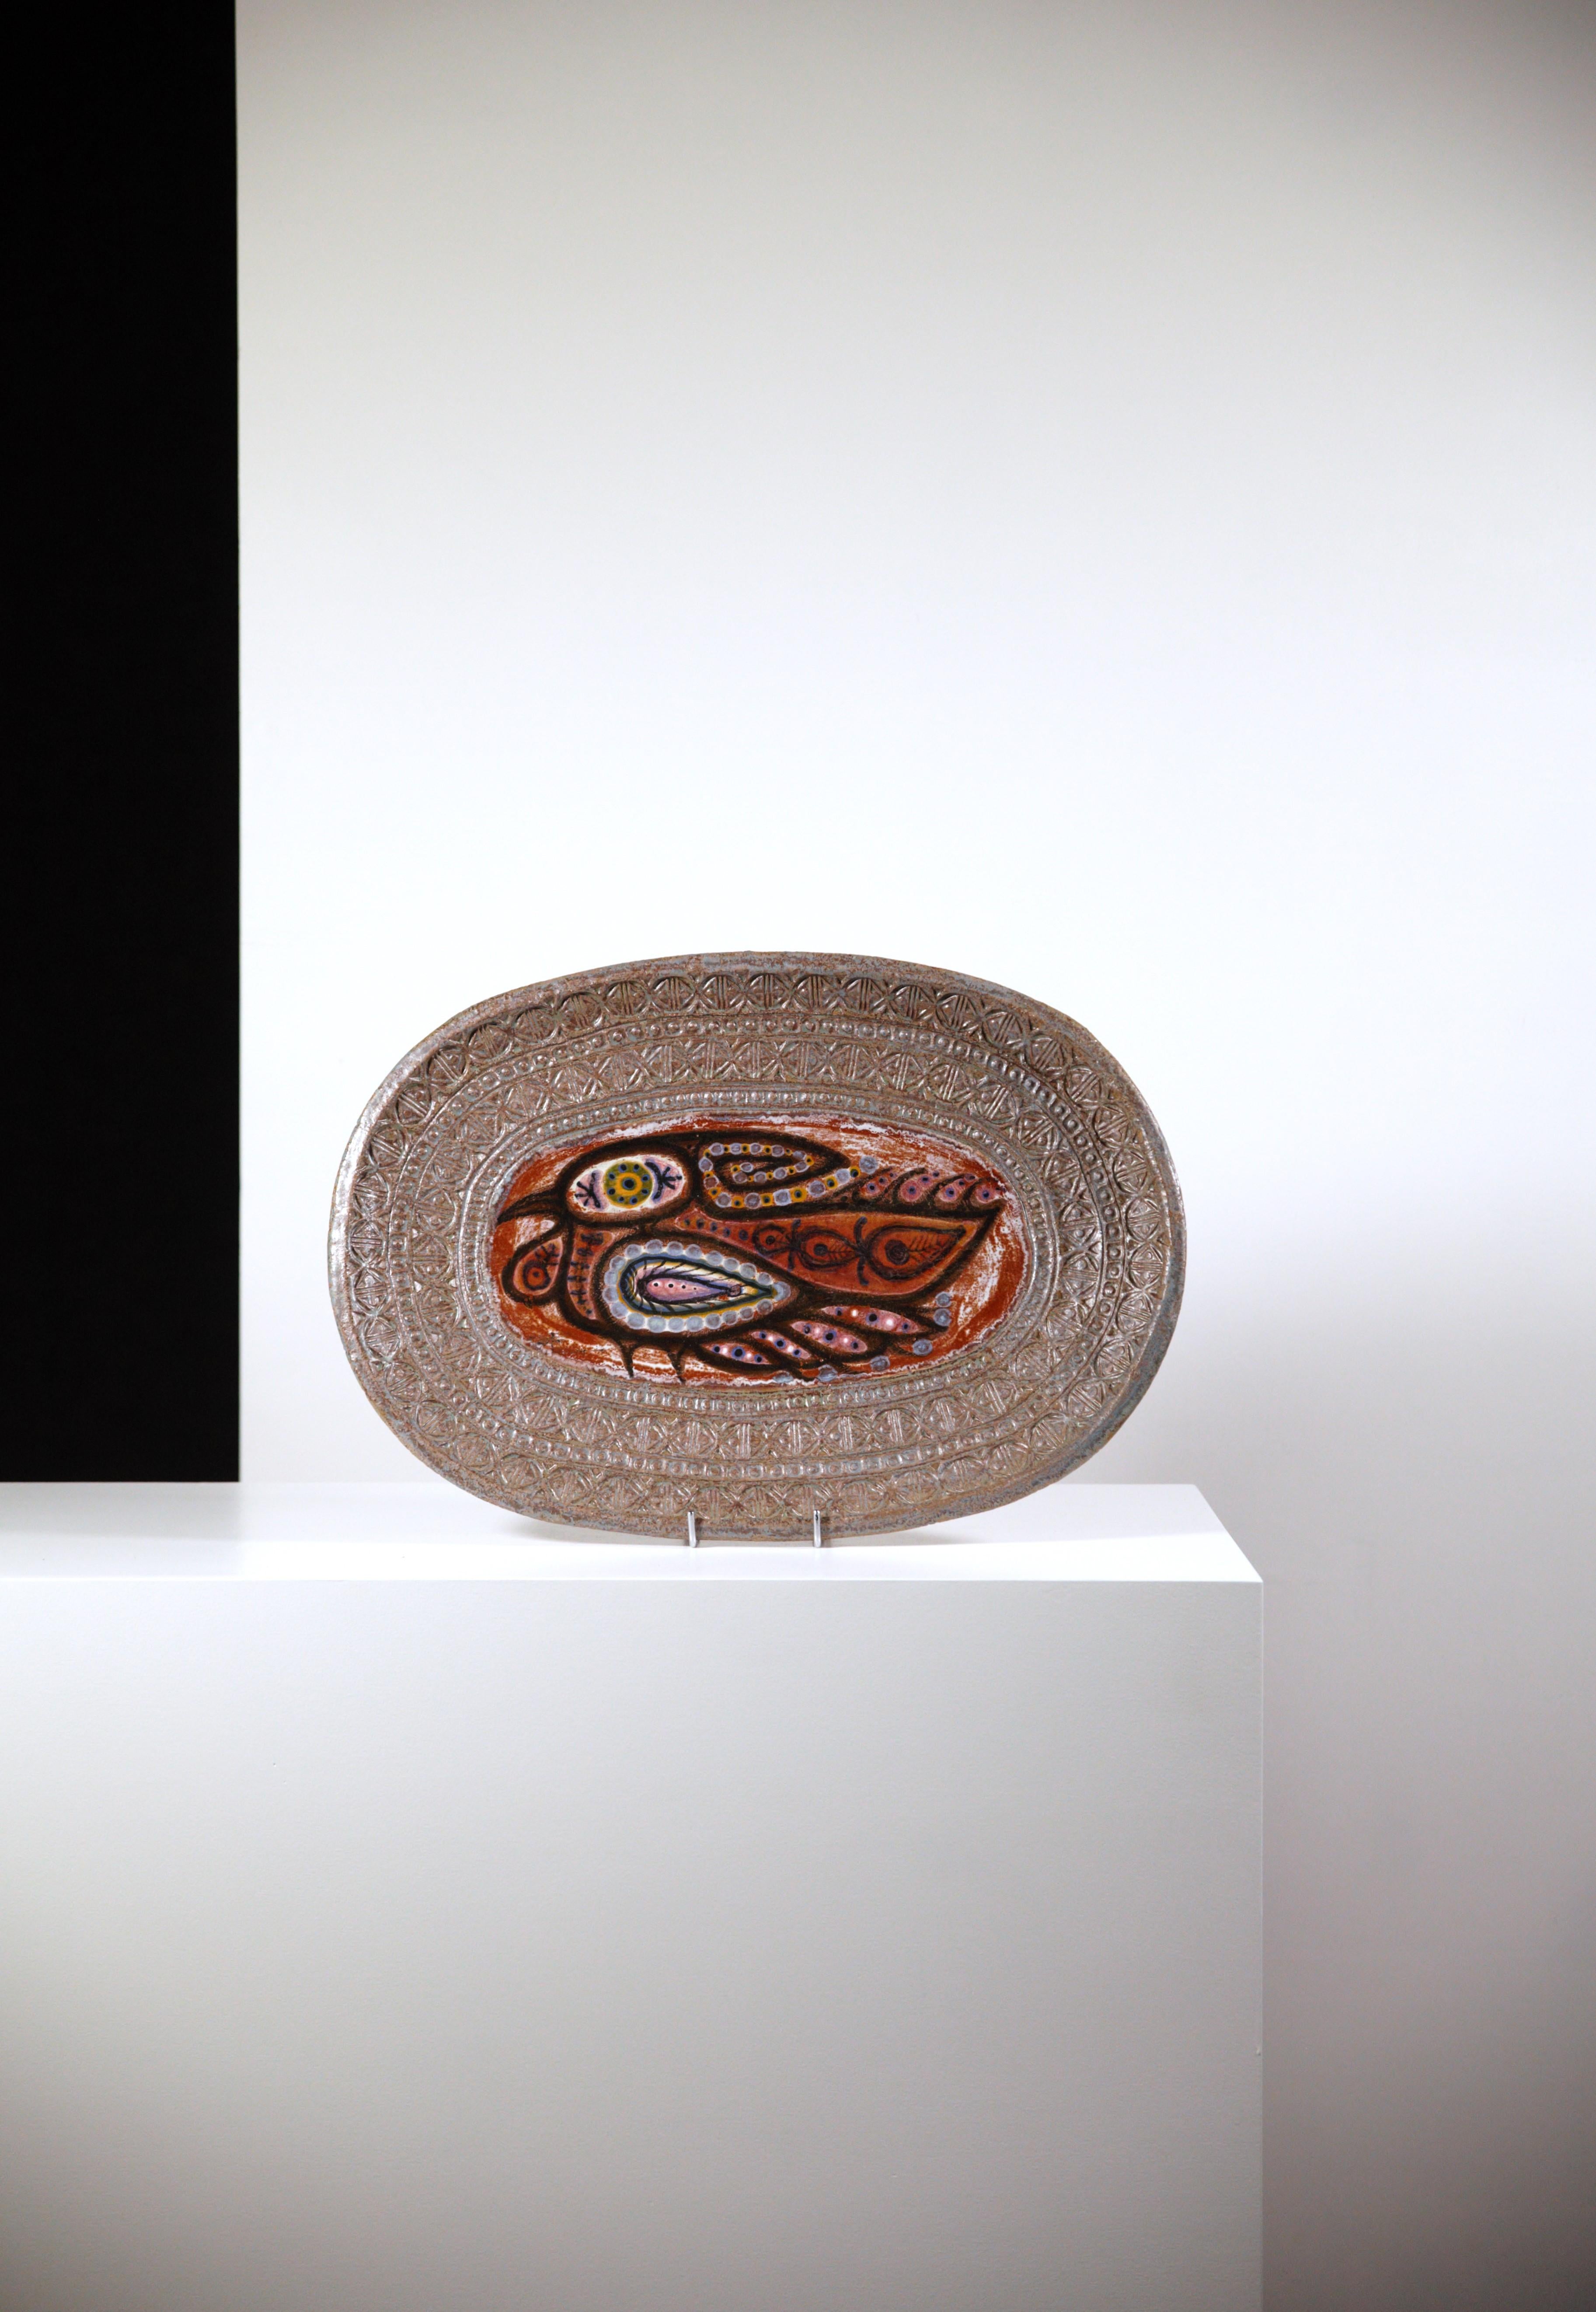 Wall ceramic dish by Jacques Poussine & Pat Rowland.

Two position on the wall.

Abstract bird decoration.

France, 1970s